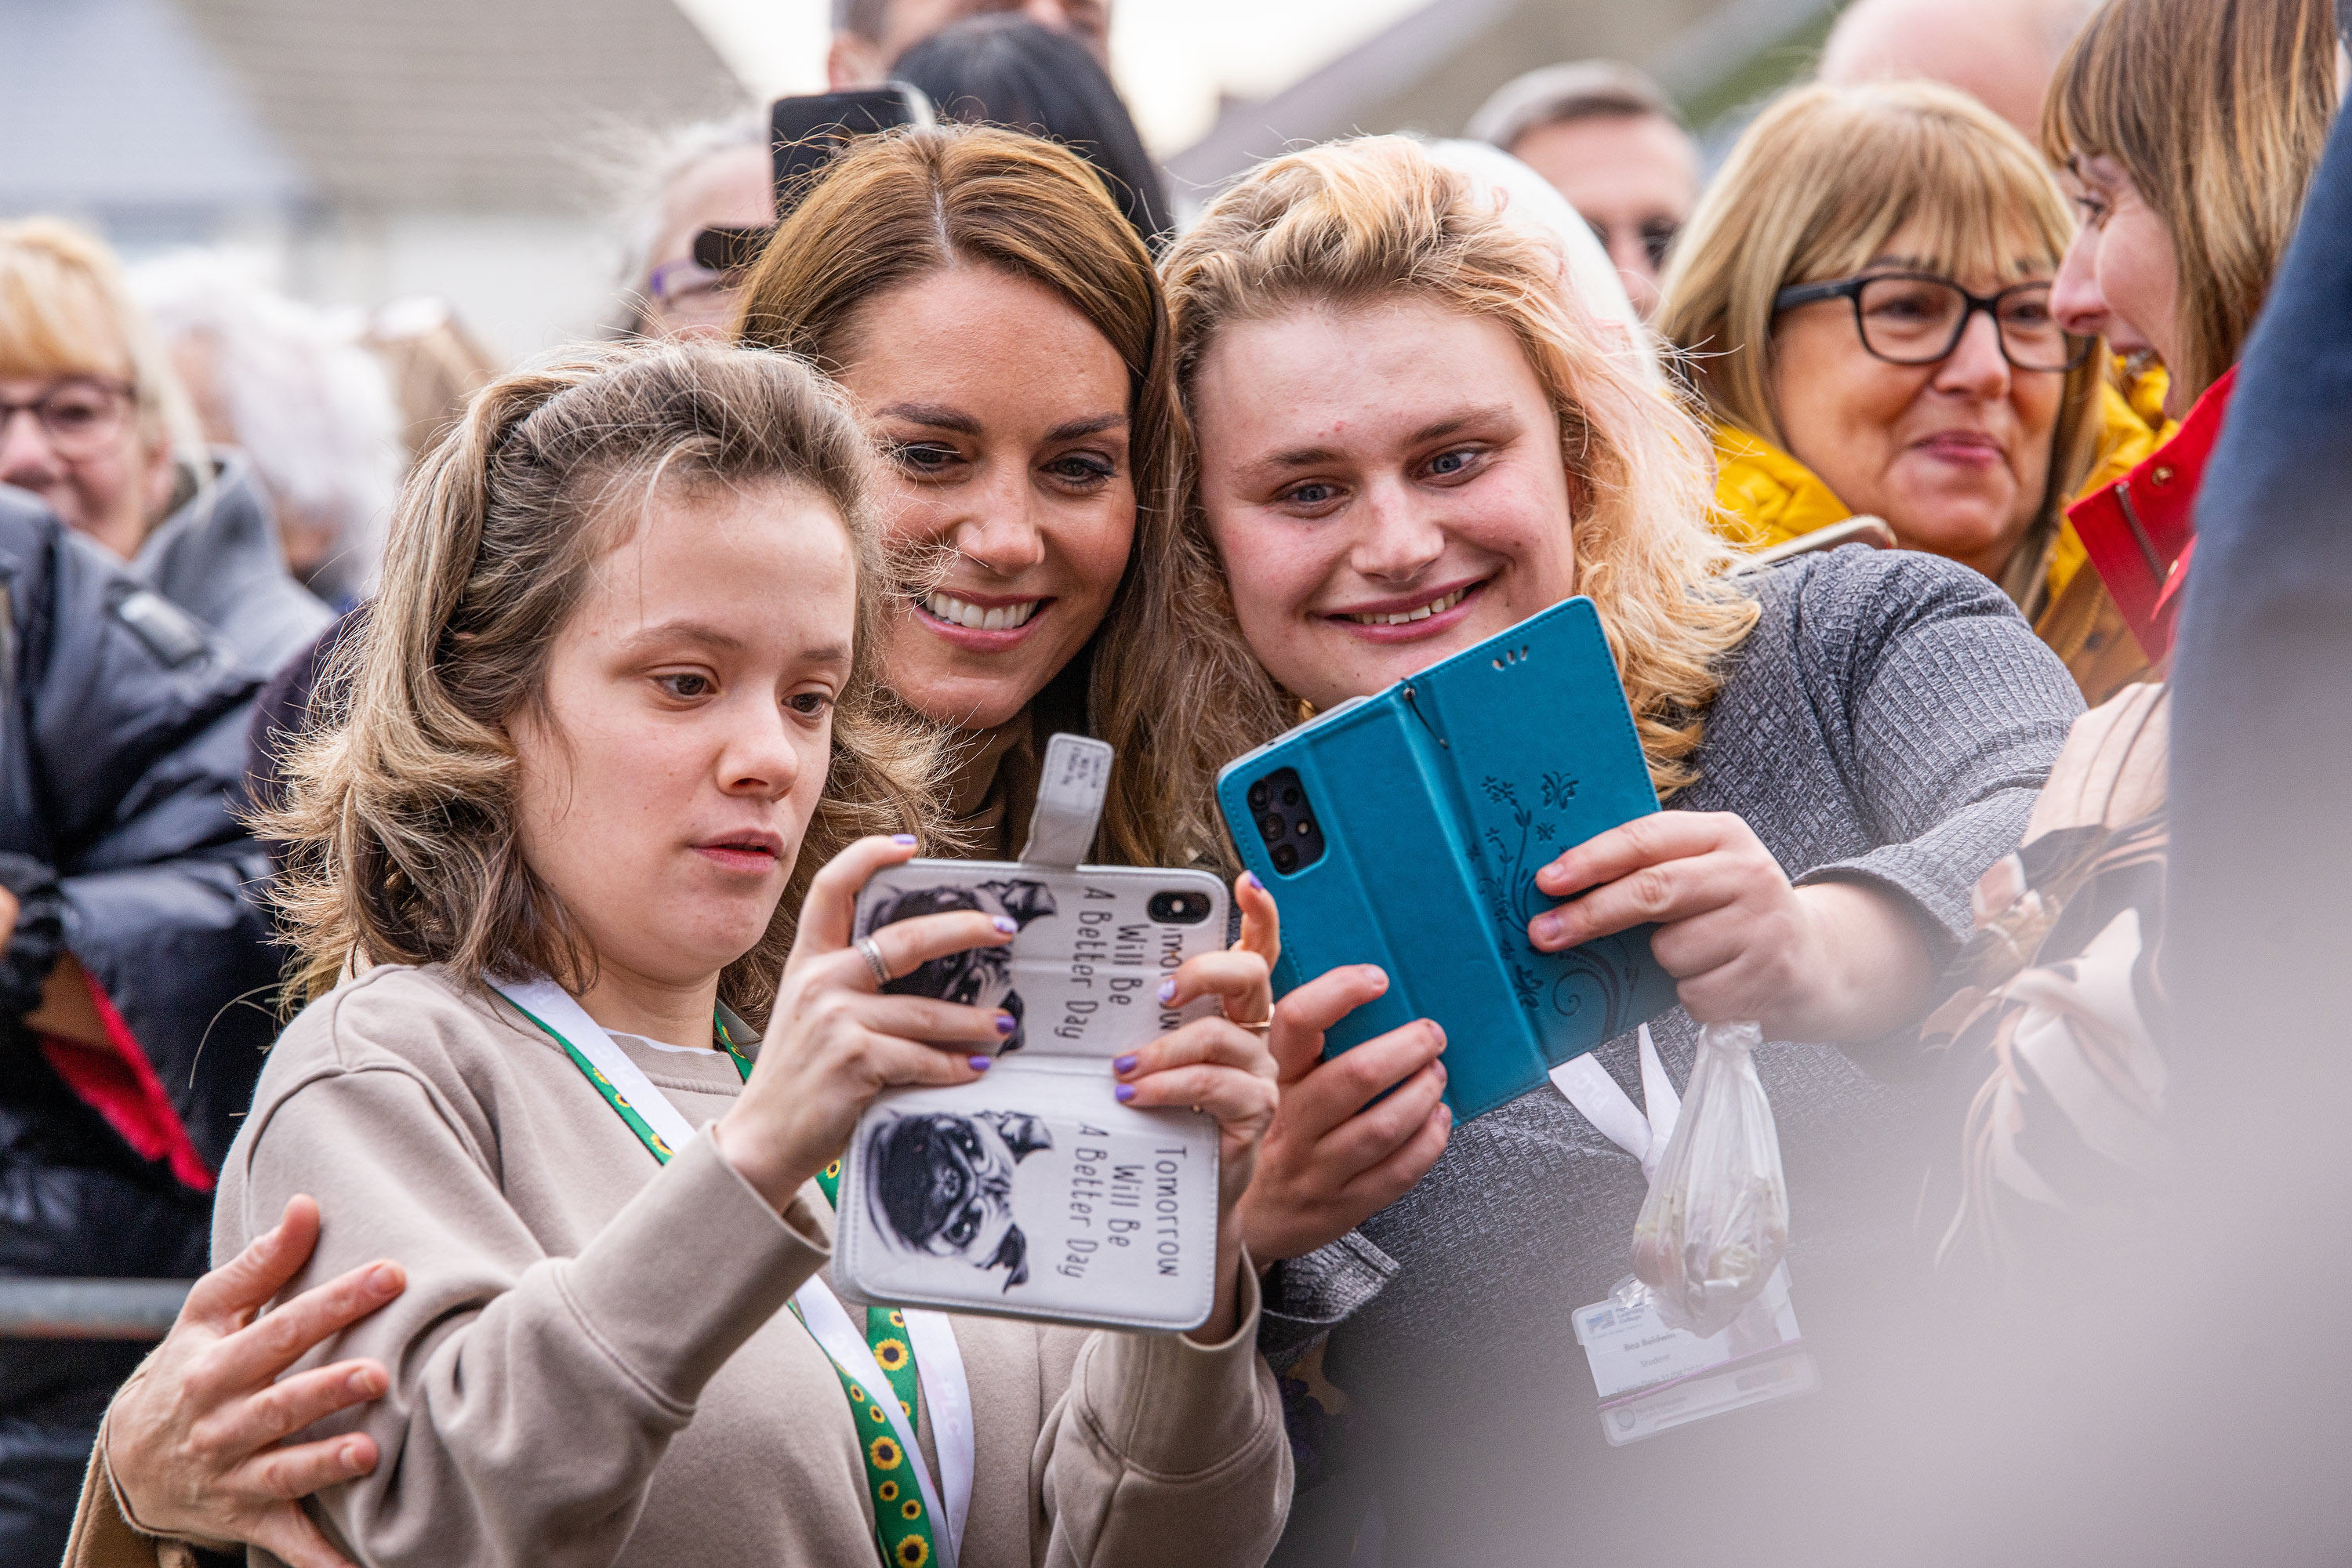 Kate Middleton takes selfies with two benefactors during her trip to Scarborough, England.